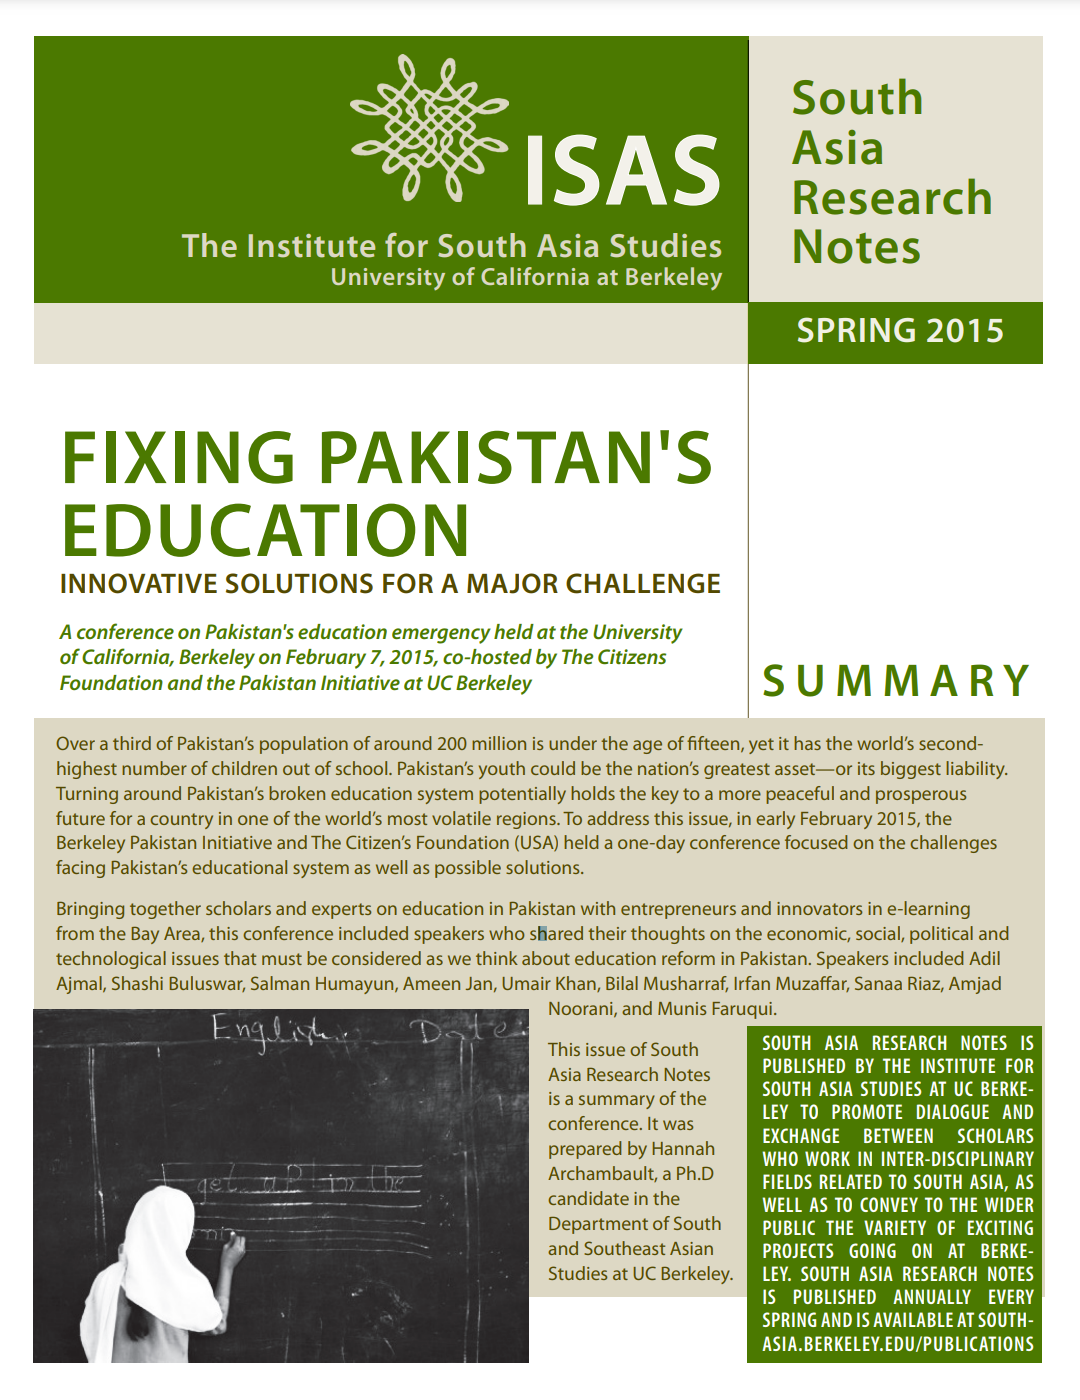 Cover image of SA Research Notes, Spring 2015